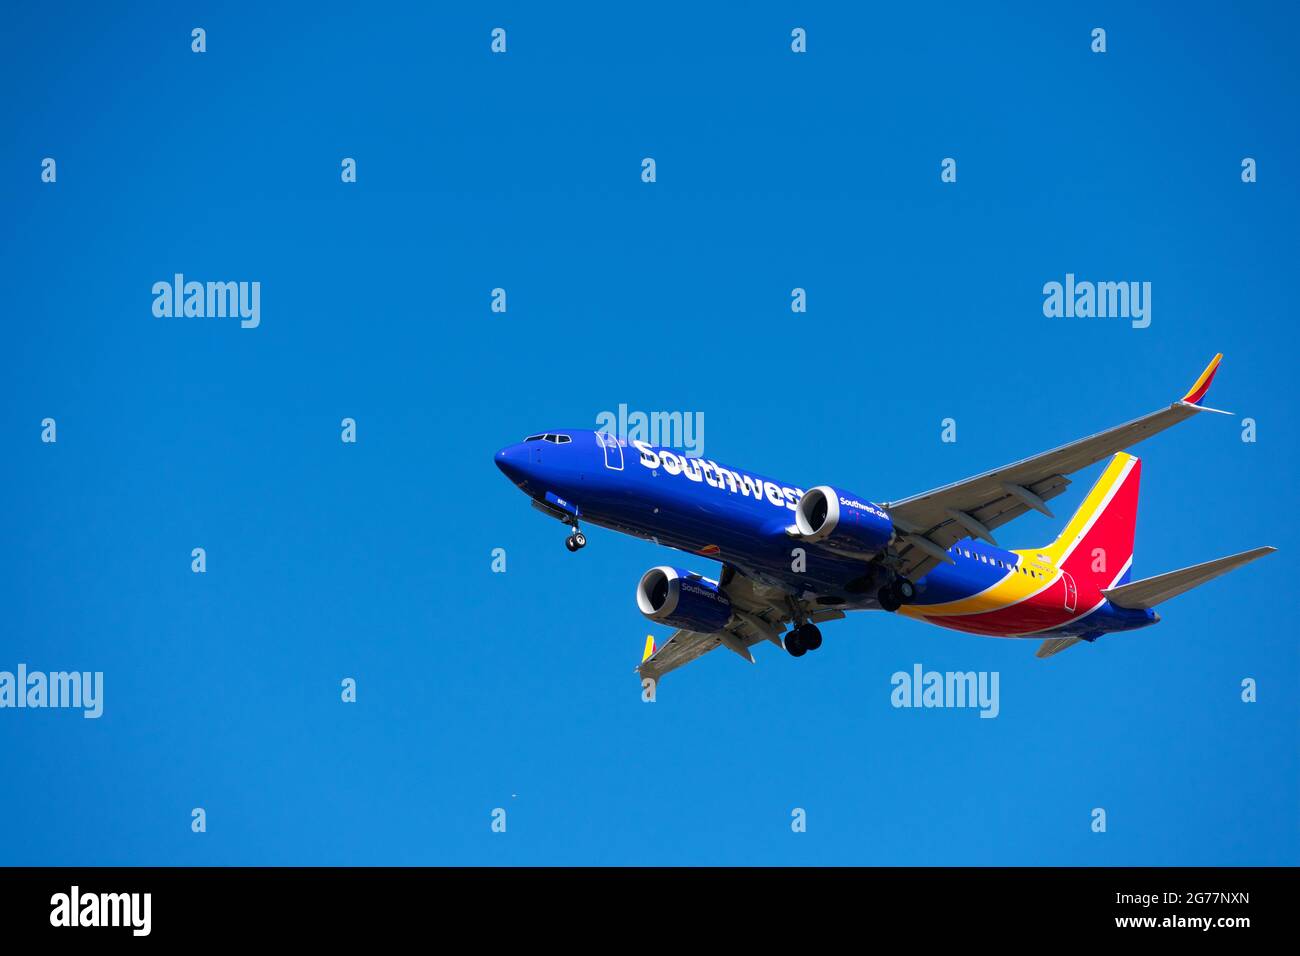 Boeing 737 MAX 8 airliner operated by Southwest Airlines is preparing for landing at the airport with deployed landing gear. Blue sky - San Jose, Cali Stock Photo